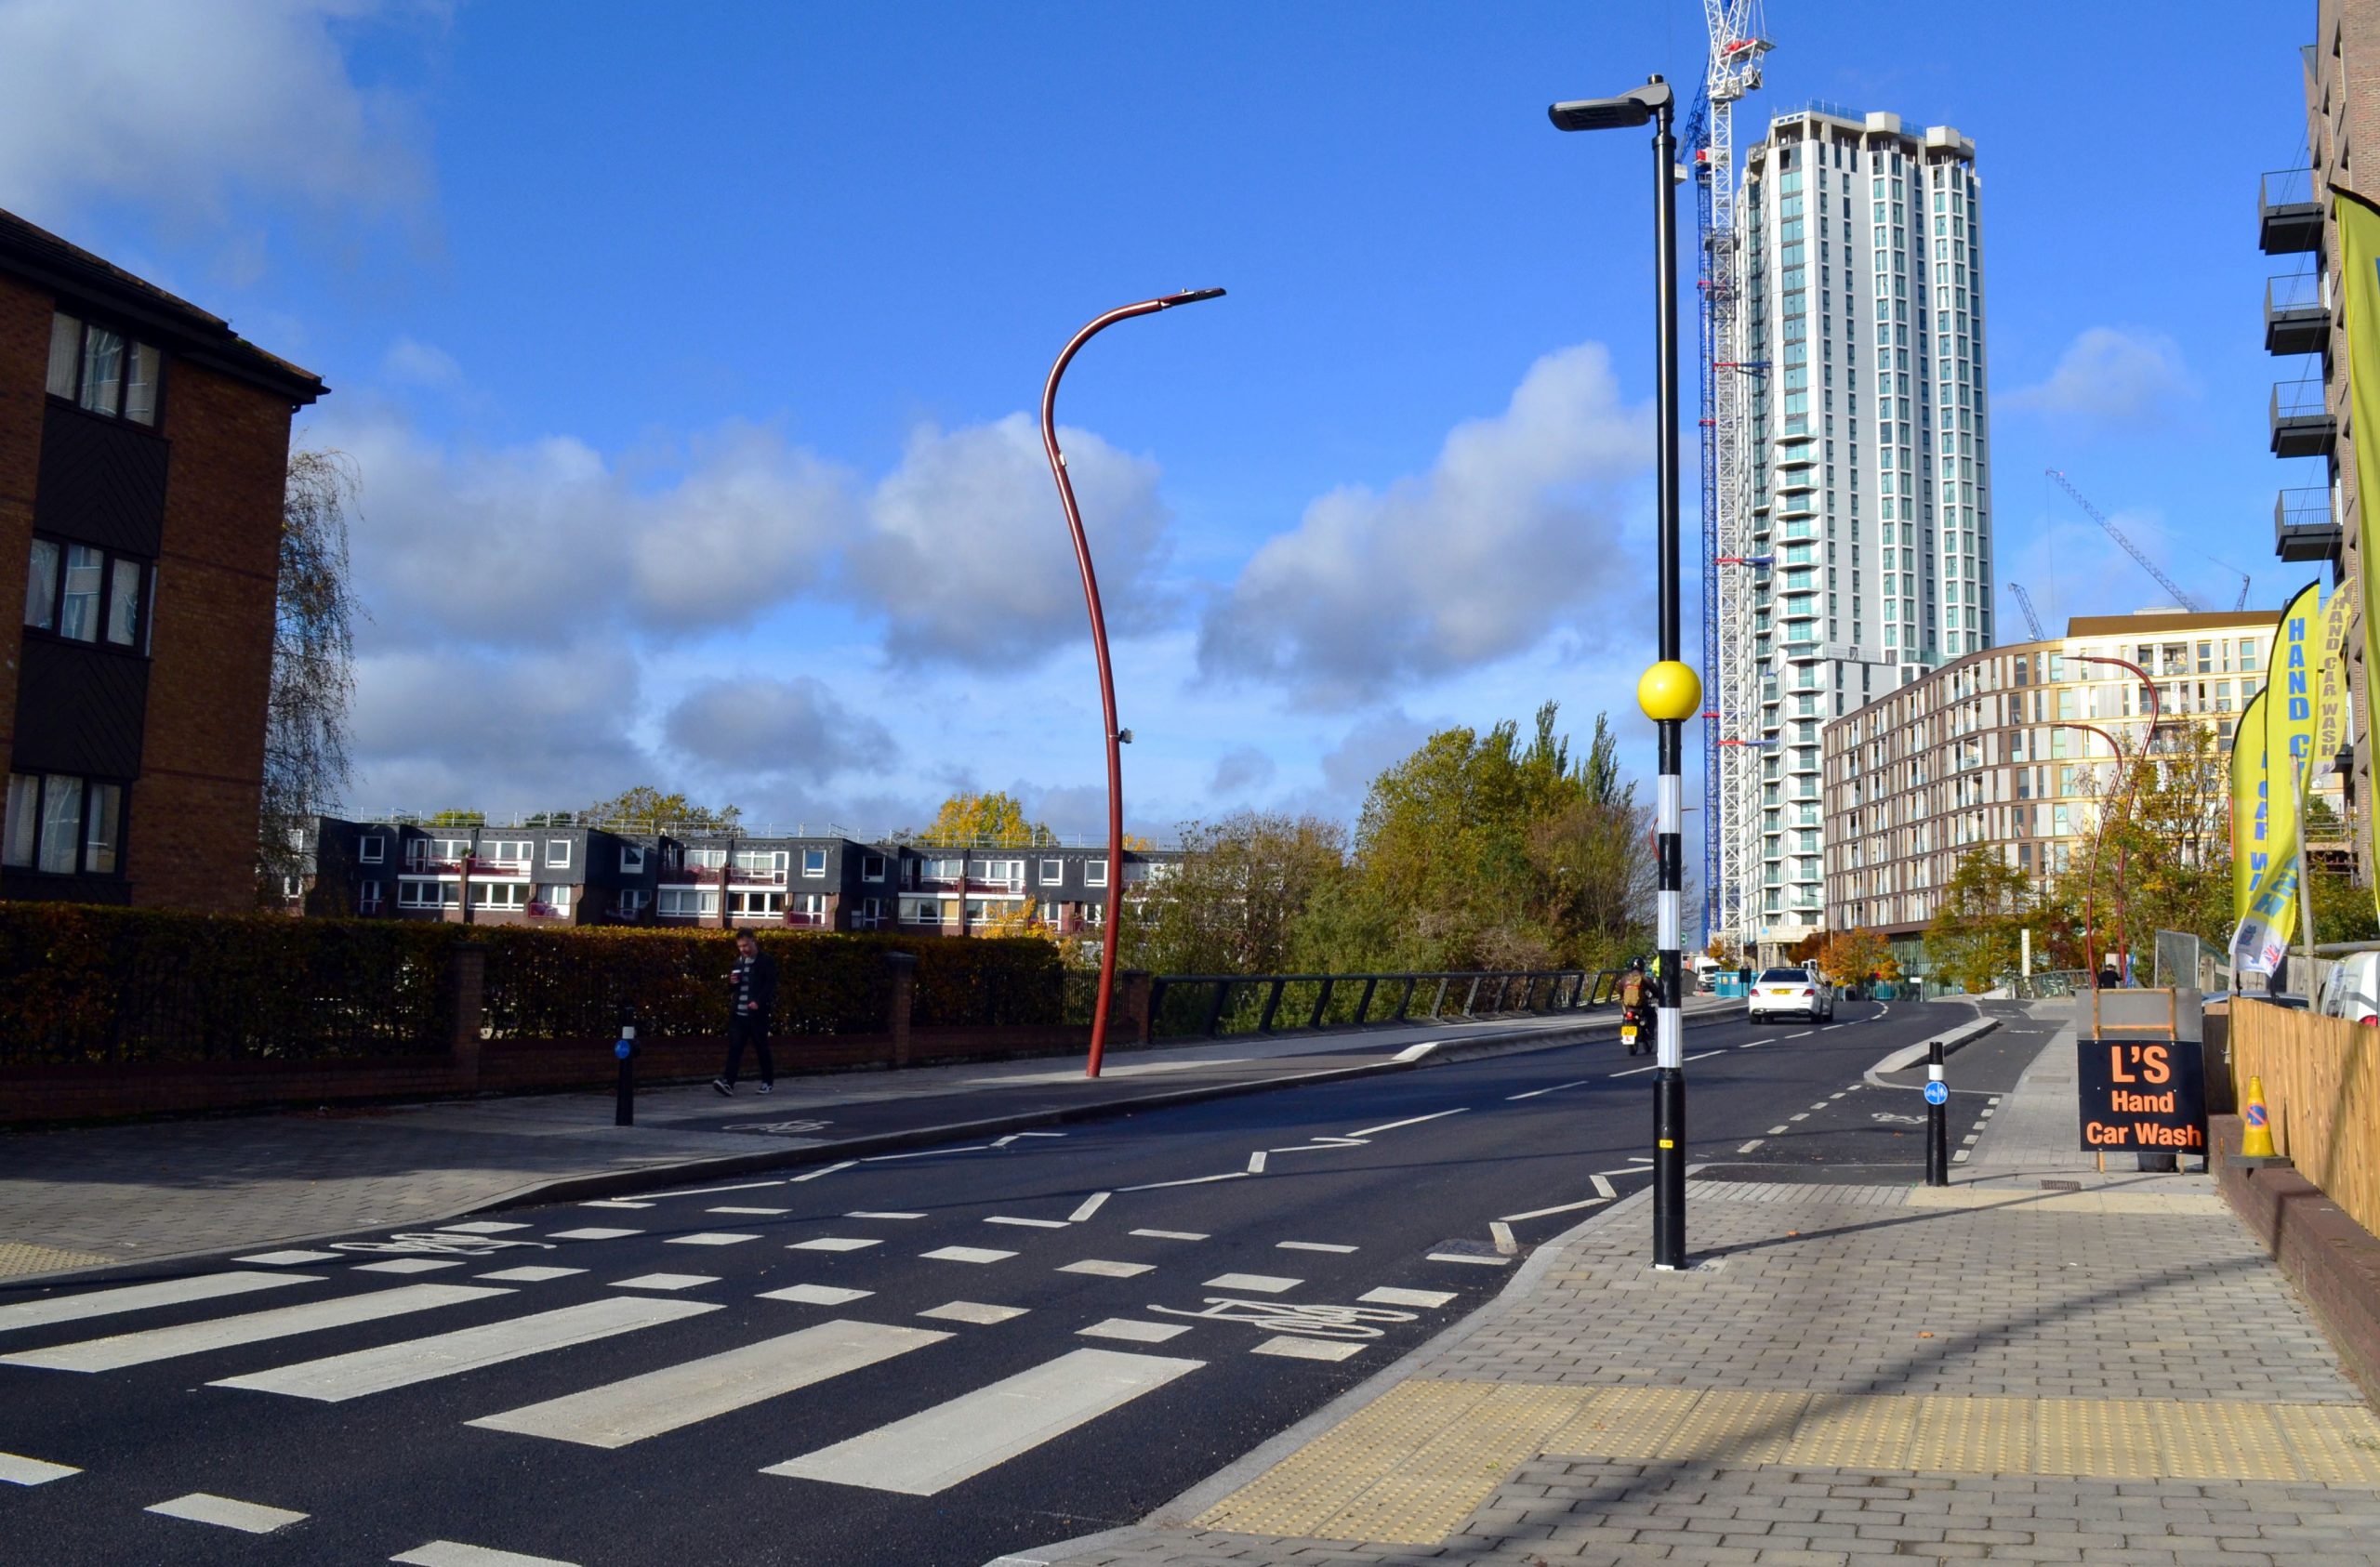 Ferry Lane image showing zebra crossing, street lighting and a building in the background. The sky is mostly blue with some small light grey clouds.